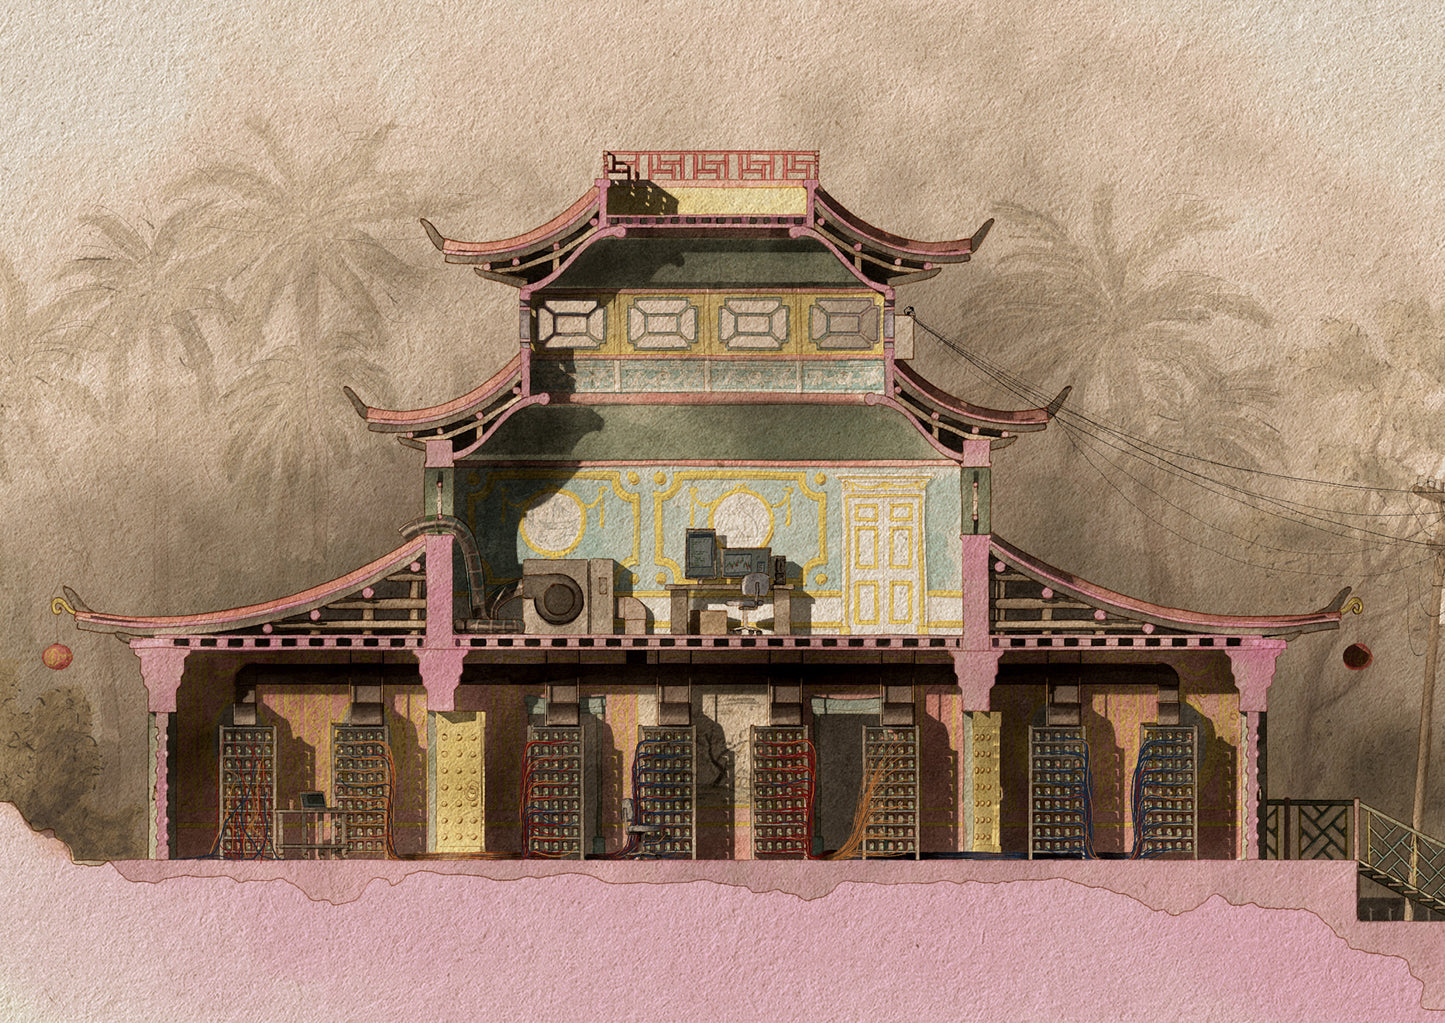 A Bitcoin Mine (in the Chinoiserie Style)